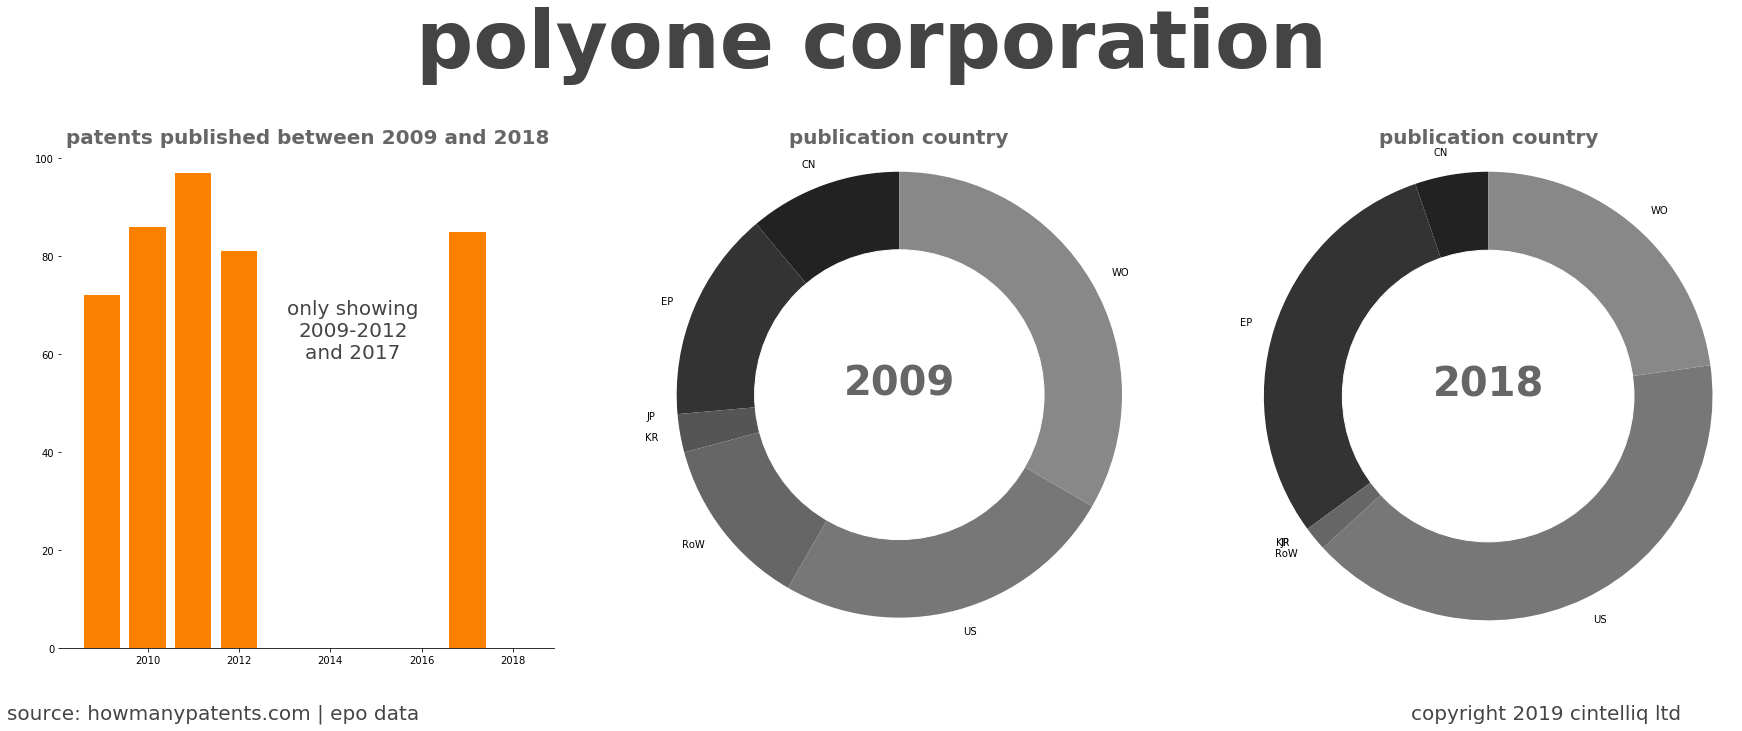 summary of patents for Polyone Corporation